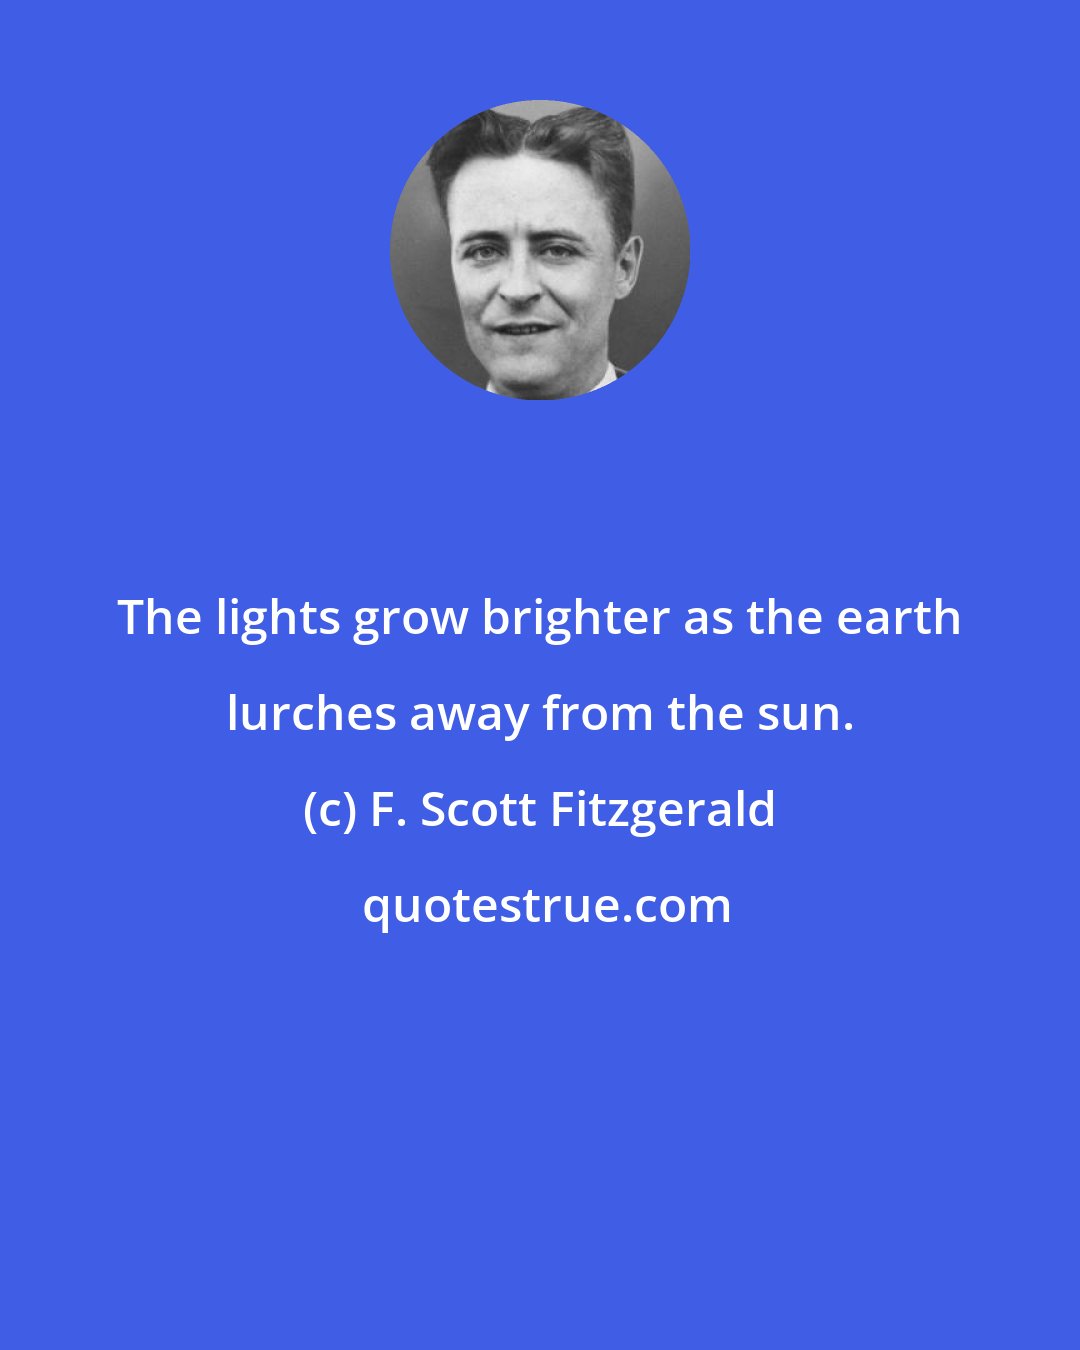 F. Scott Fitzgerald: The lights grow brighter as the earth lurches away from the sun.